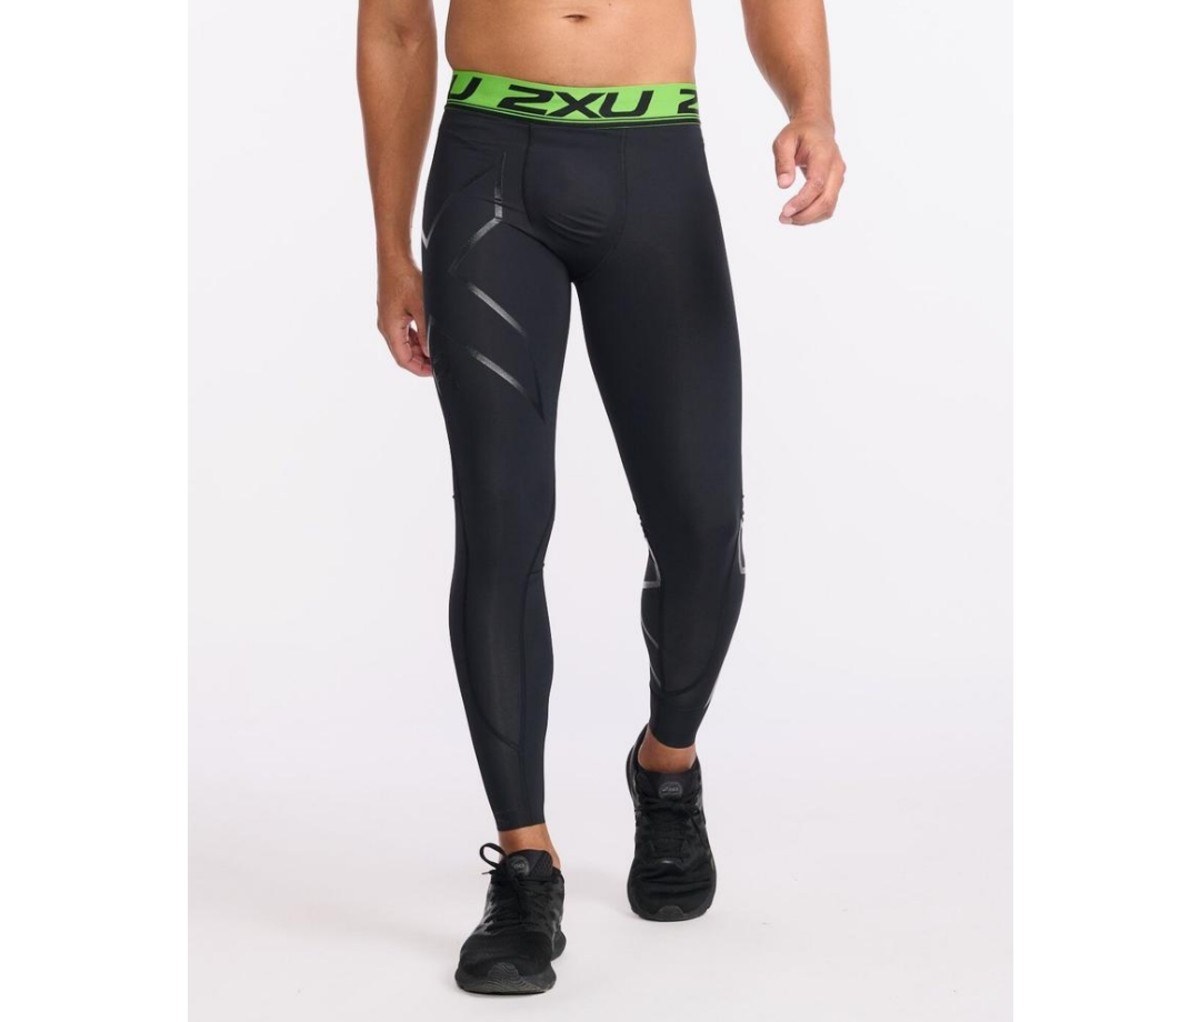 Can You Sleep In Compression Tights? – MindBodyPal